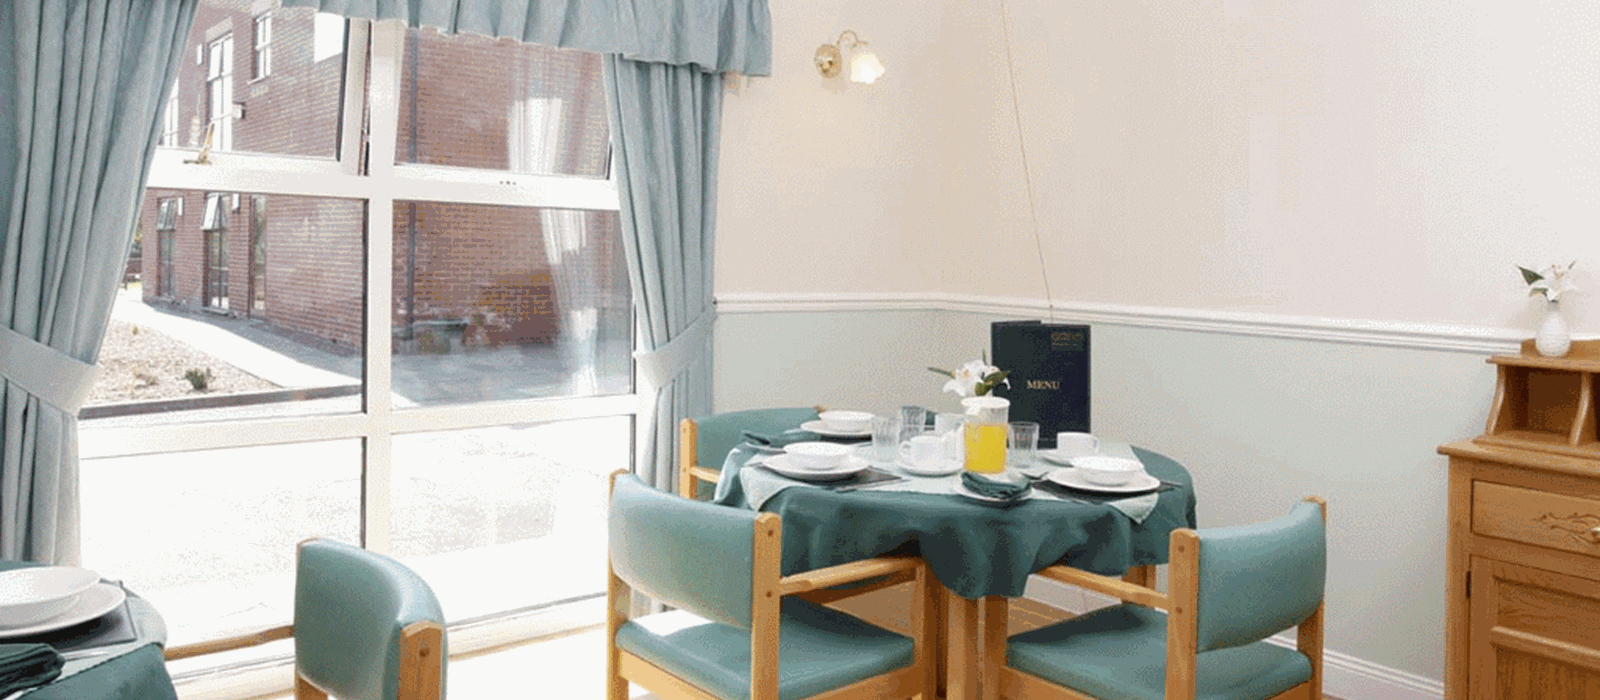 Dining Area of Abigail Lodge Care Home in Consett, County Durham